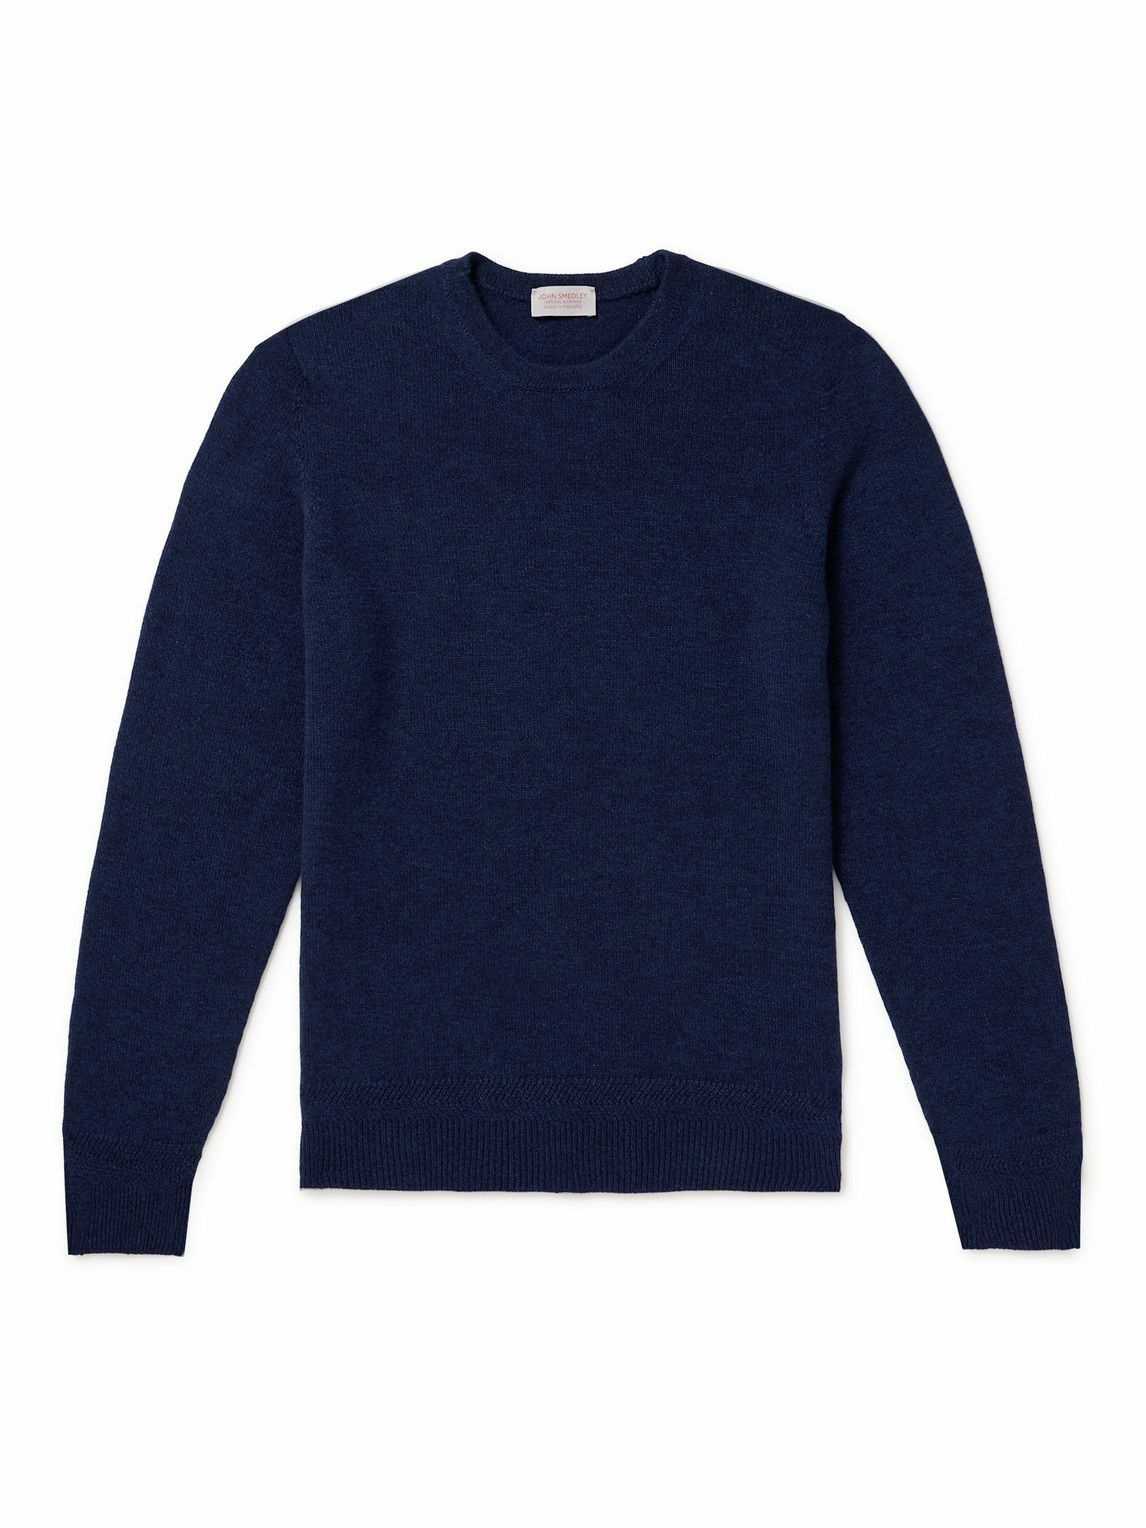 John Smedley - Niko Recycled Cashmere and Merino Wool-Blend Sweater ...